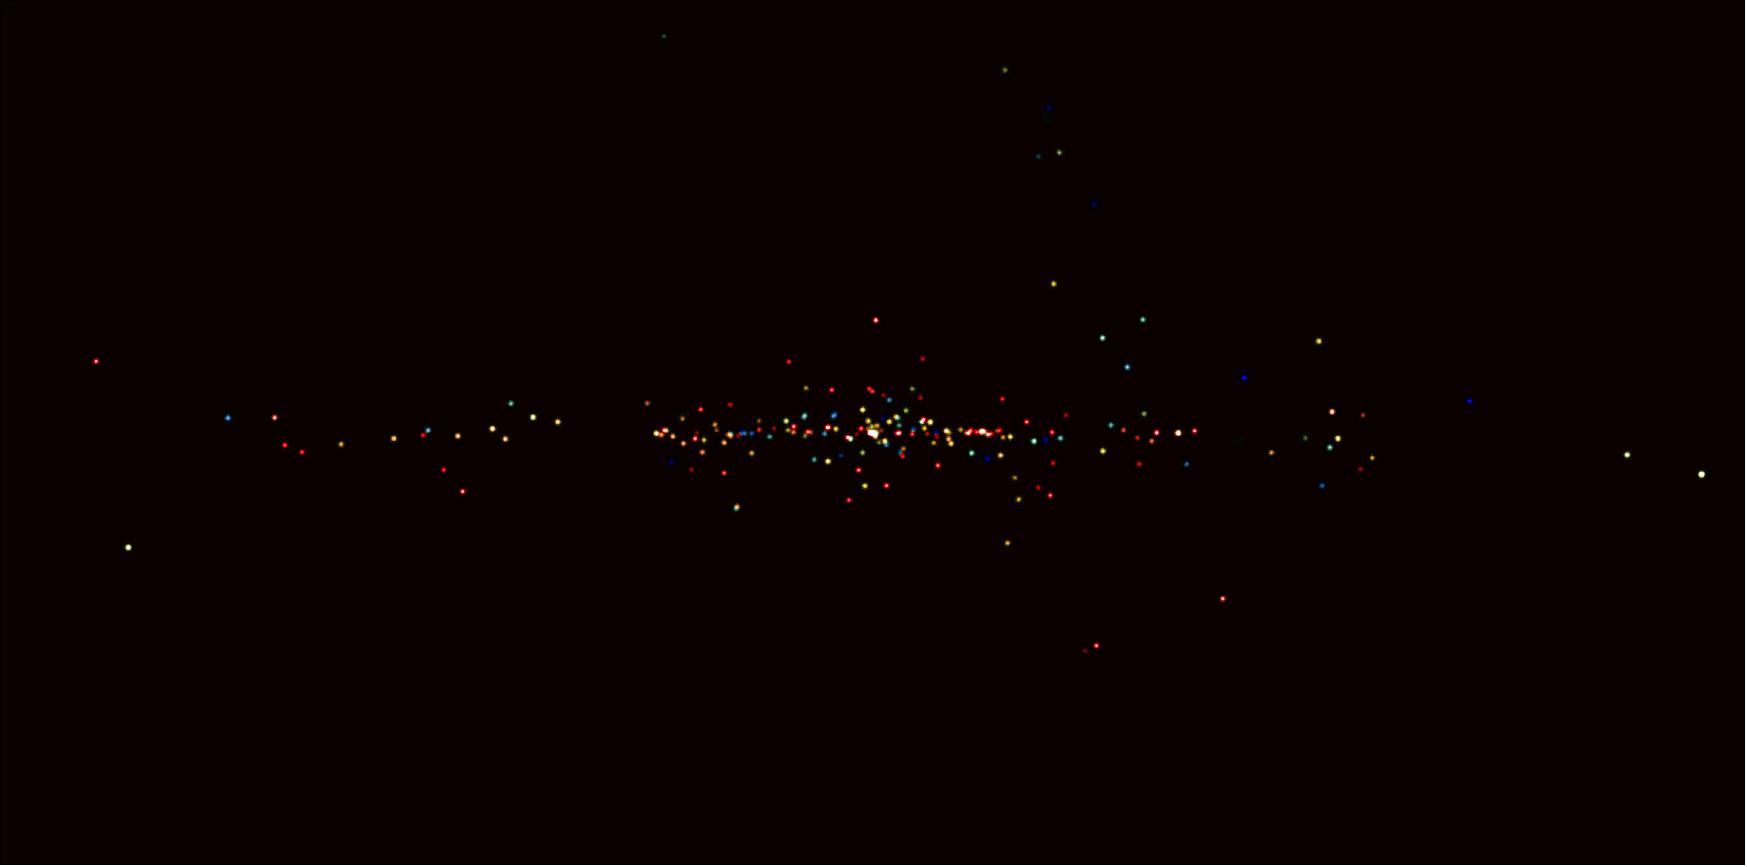 Figure 33: This image shows the sky at hard X-ray energies as seen by ESA's INTEGRAL observatory. The data have been collected with the IBIS/ISGRI instrument on board INTEGRAL in the 18–40 keV energy range (as a comparison, visible light corresponds to 1.65–3.1 eV), image credit: ESA/F. Lebrun/CEA Saclay, Service d'Astrophysique) 37)